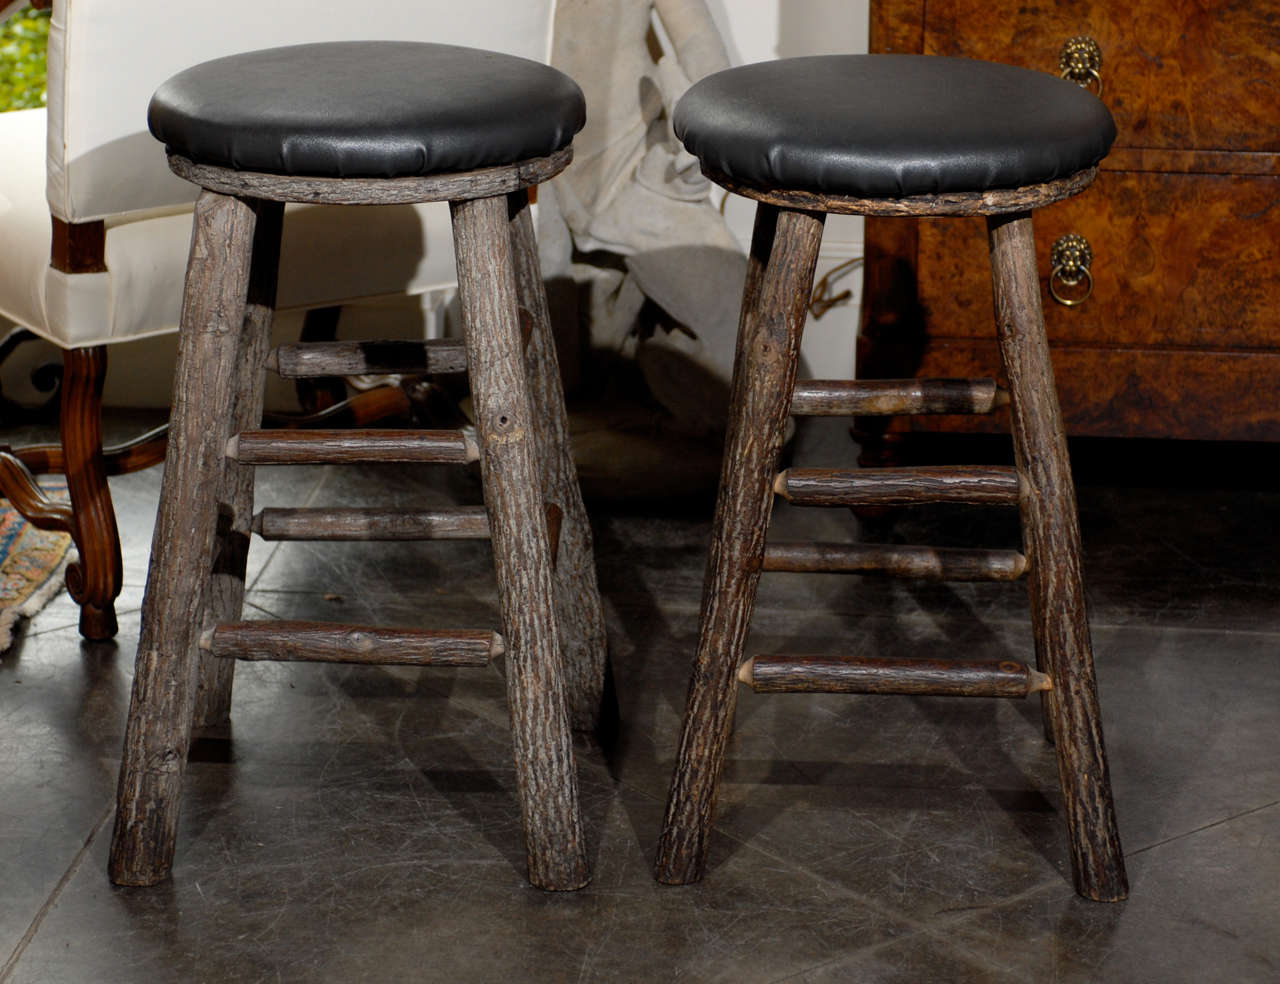 American 10 Round Rustic Vintage Bar Stools with Tree Logs Legs from the 20th Century For Sale